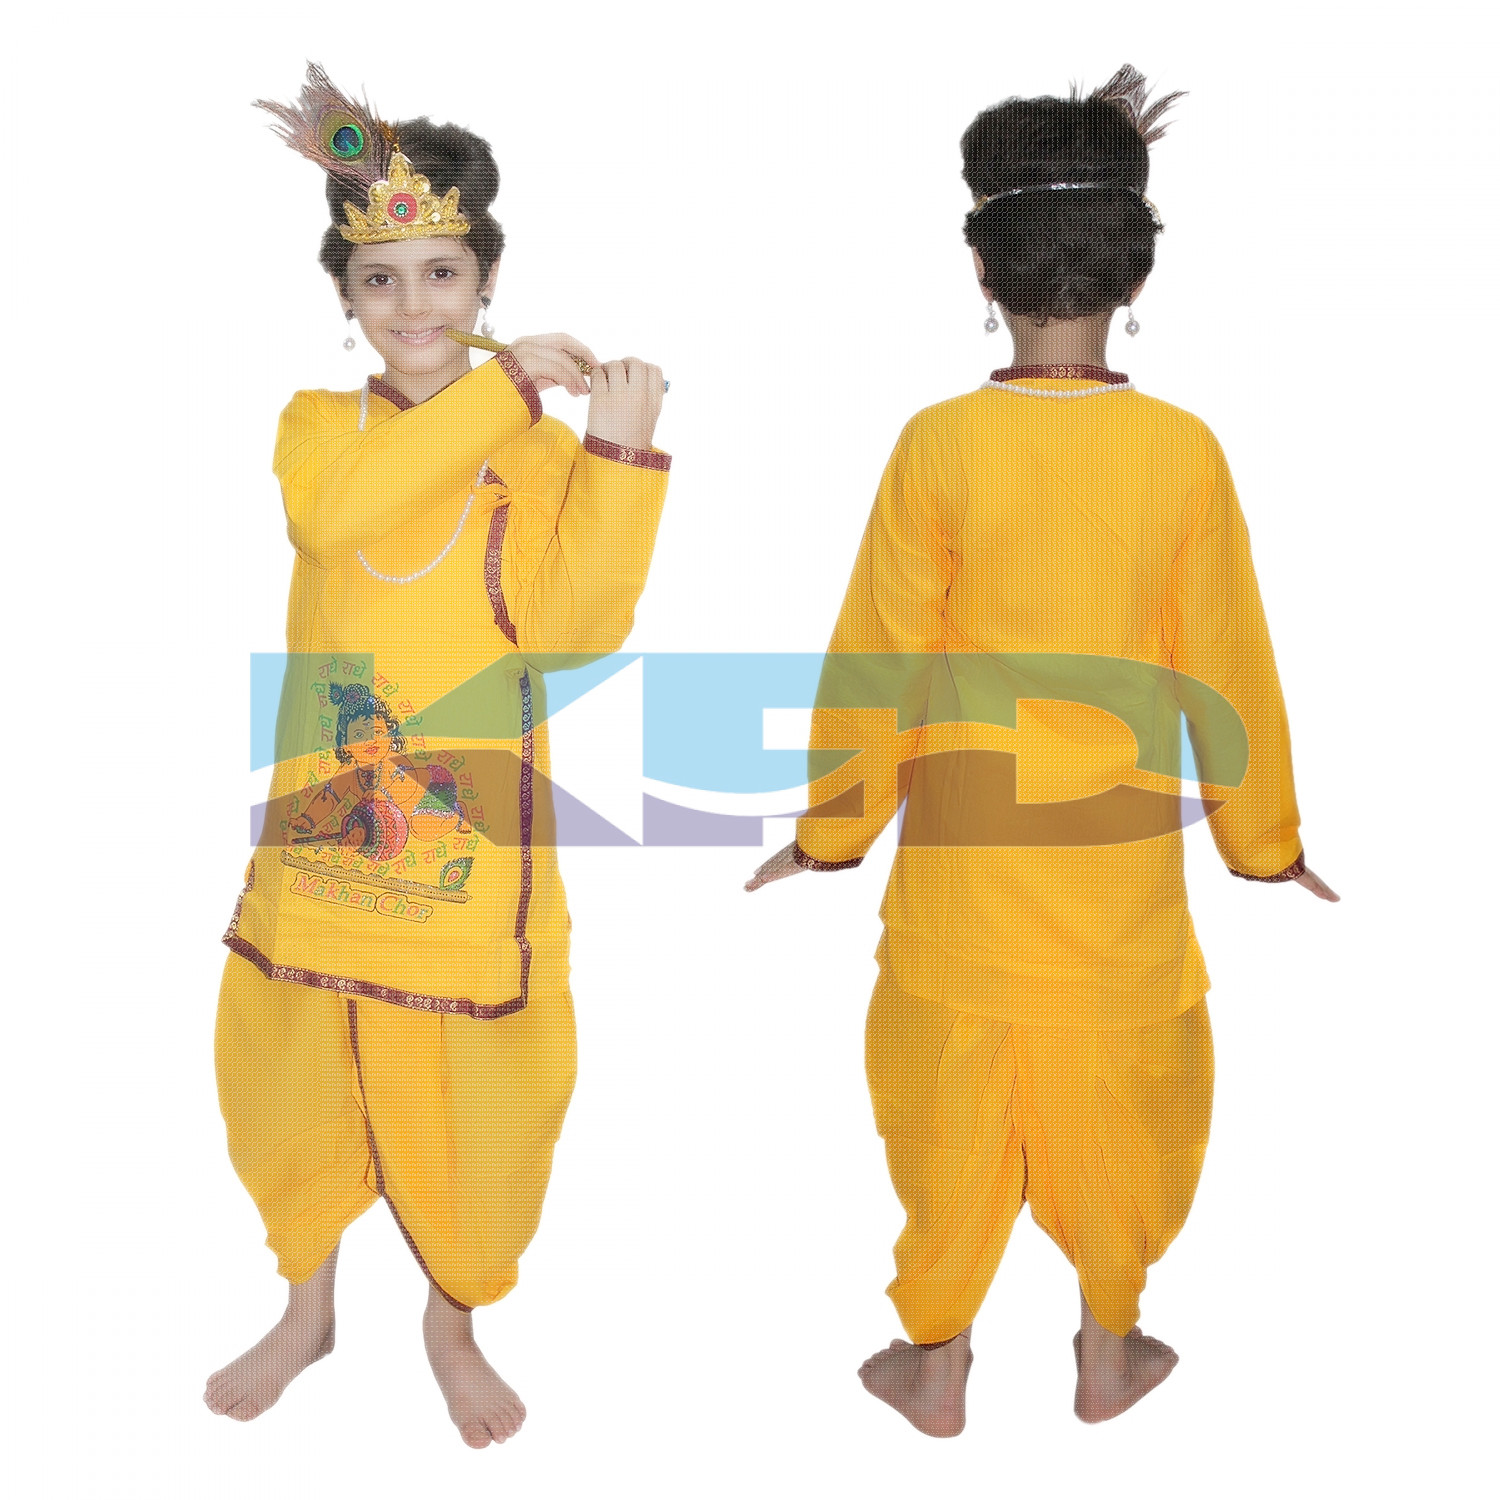 Krishna in Cotton Without Jewellery fancy dress for kids,Krishnaleela/Janmashtami/Kanha/Mythological Character for Annual functionTtheme Party/Competition/Stage Shows Dress